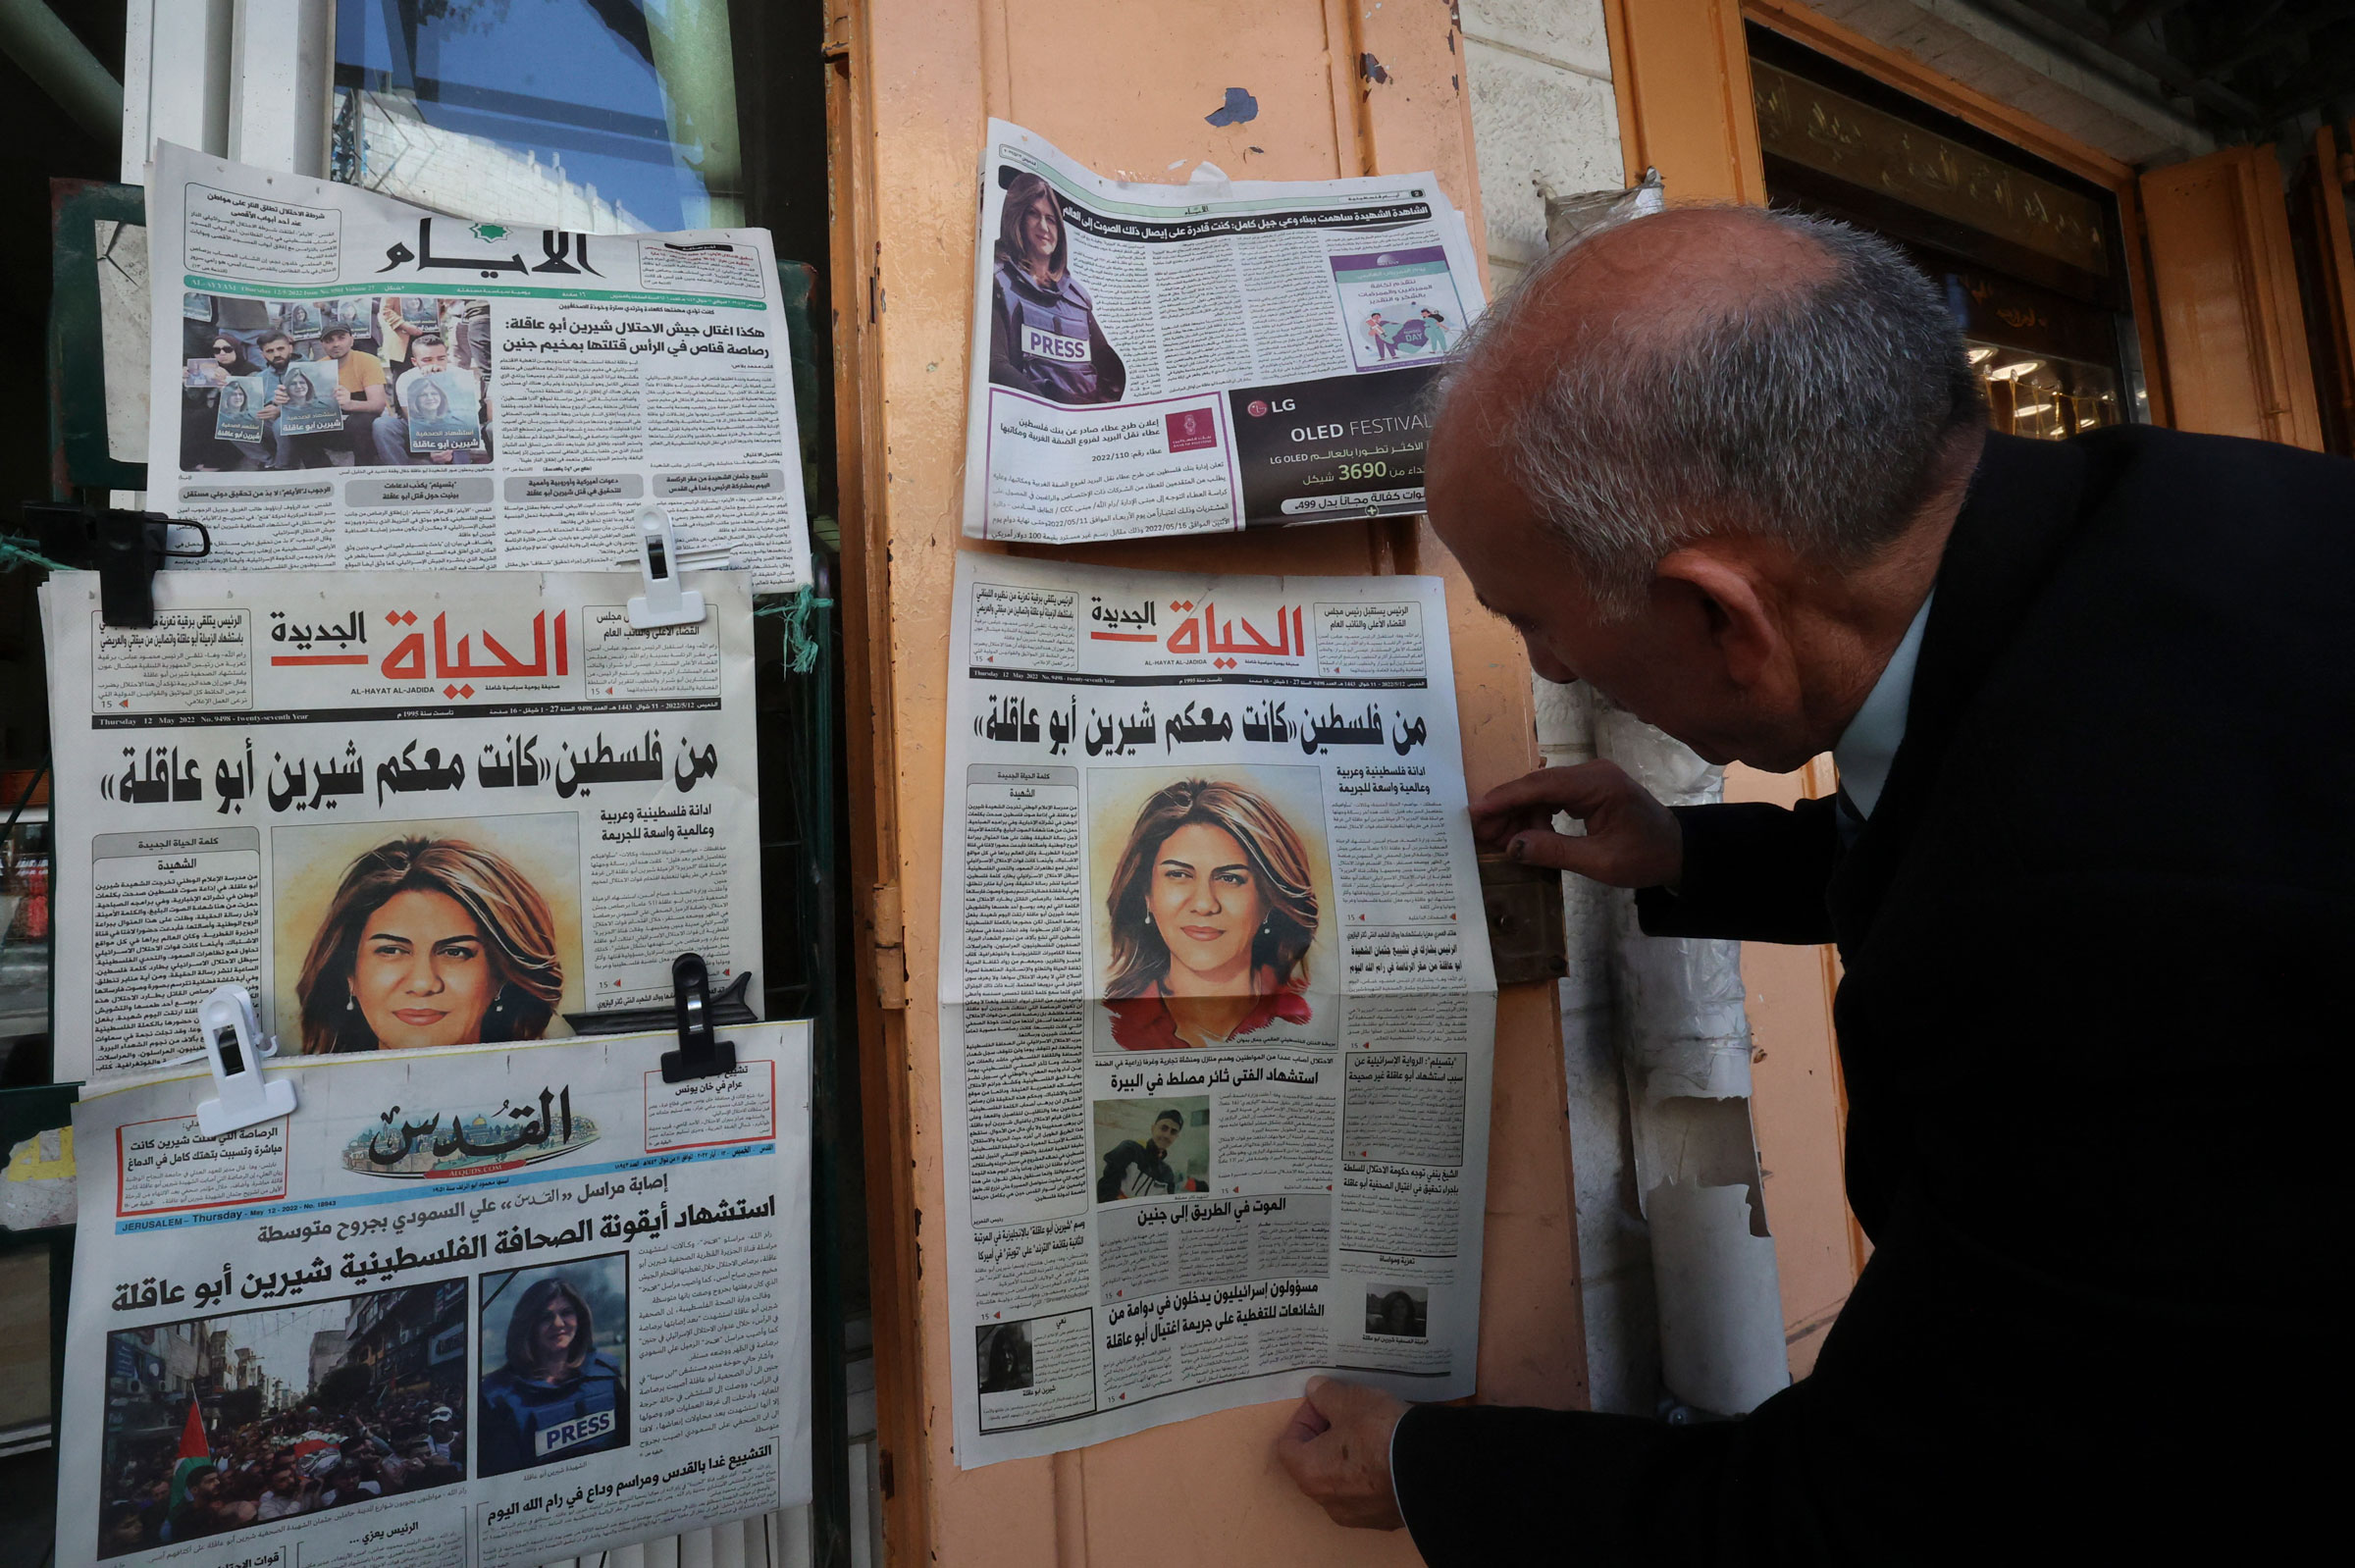 A Palestinian man looks at the front pages of local newspapers reporting on the death of veteran Al-Jazeera journalist Shireen Abu Akleh